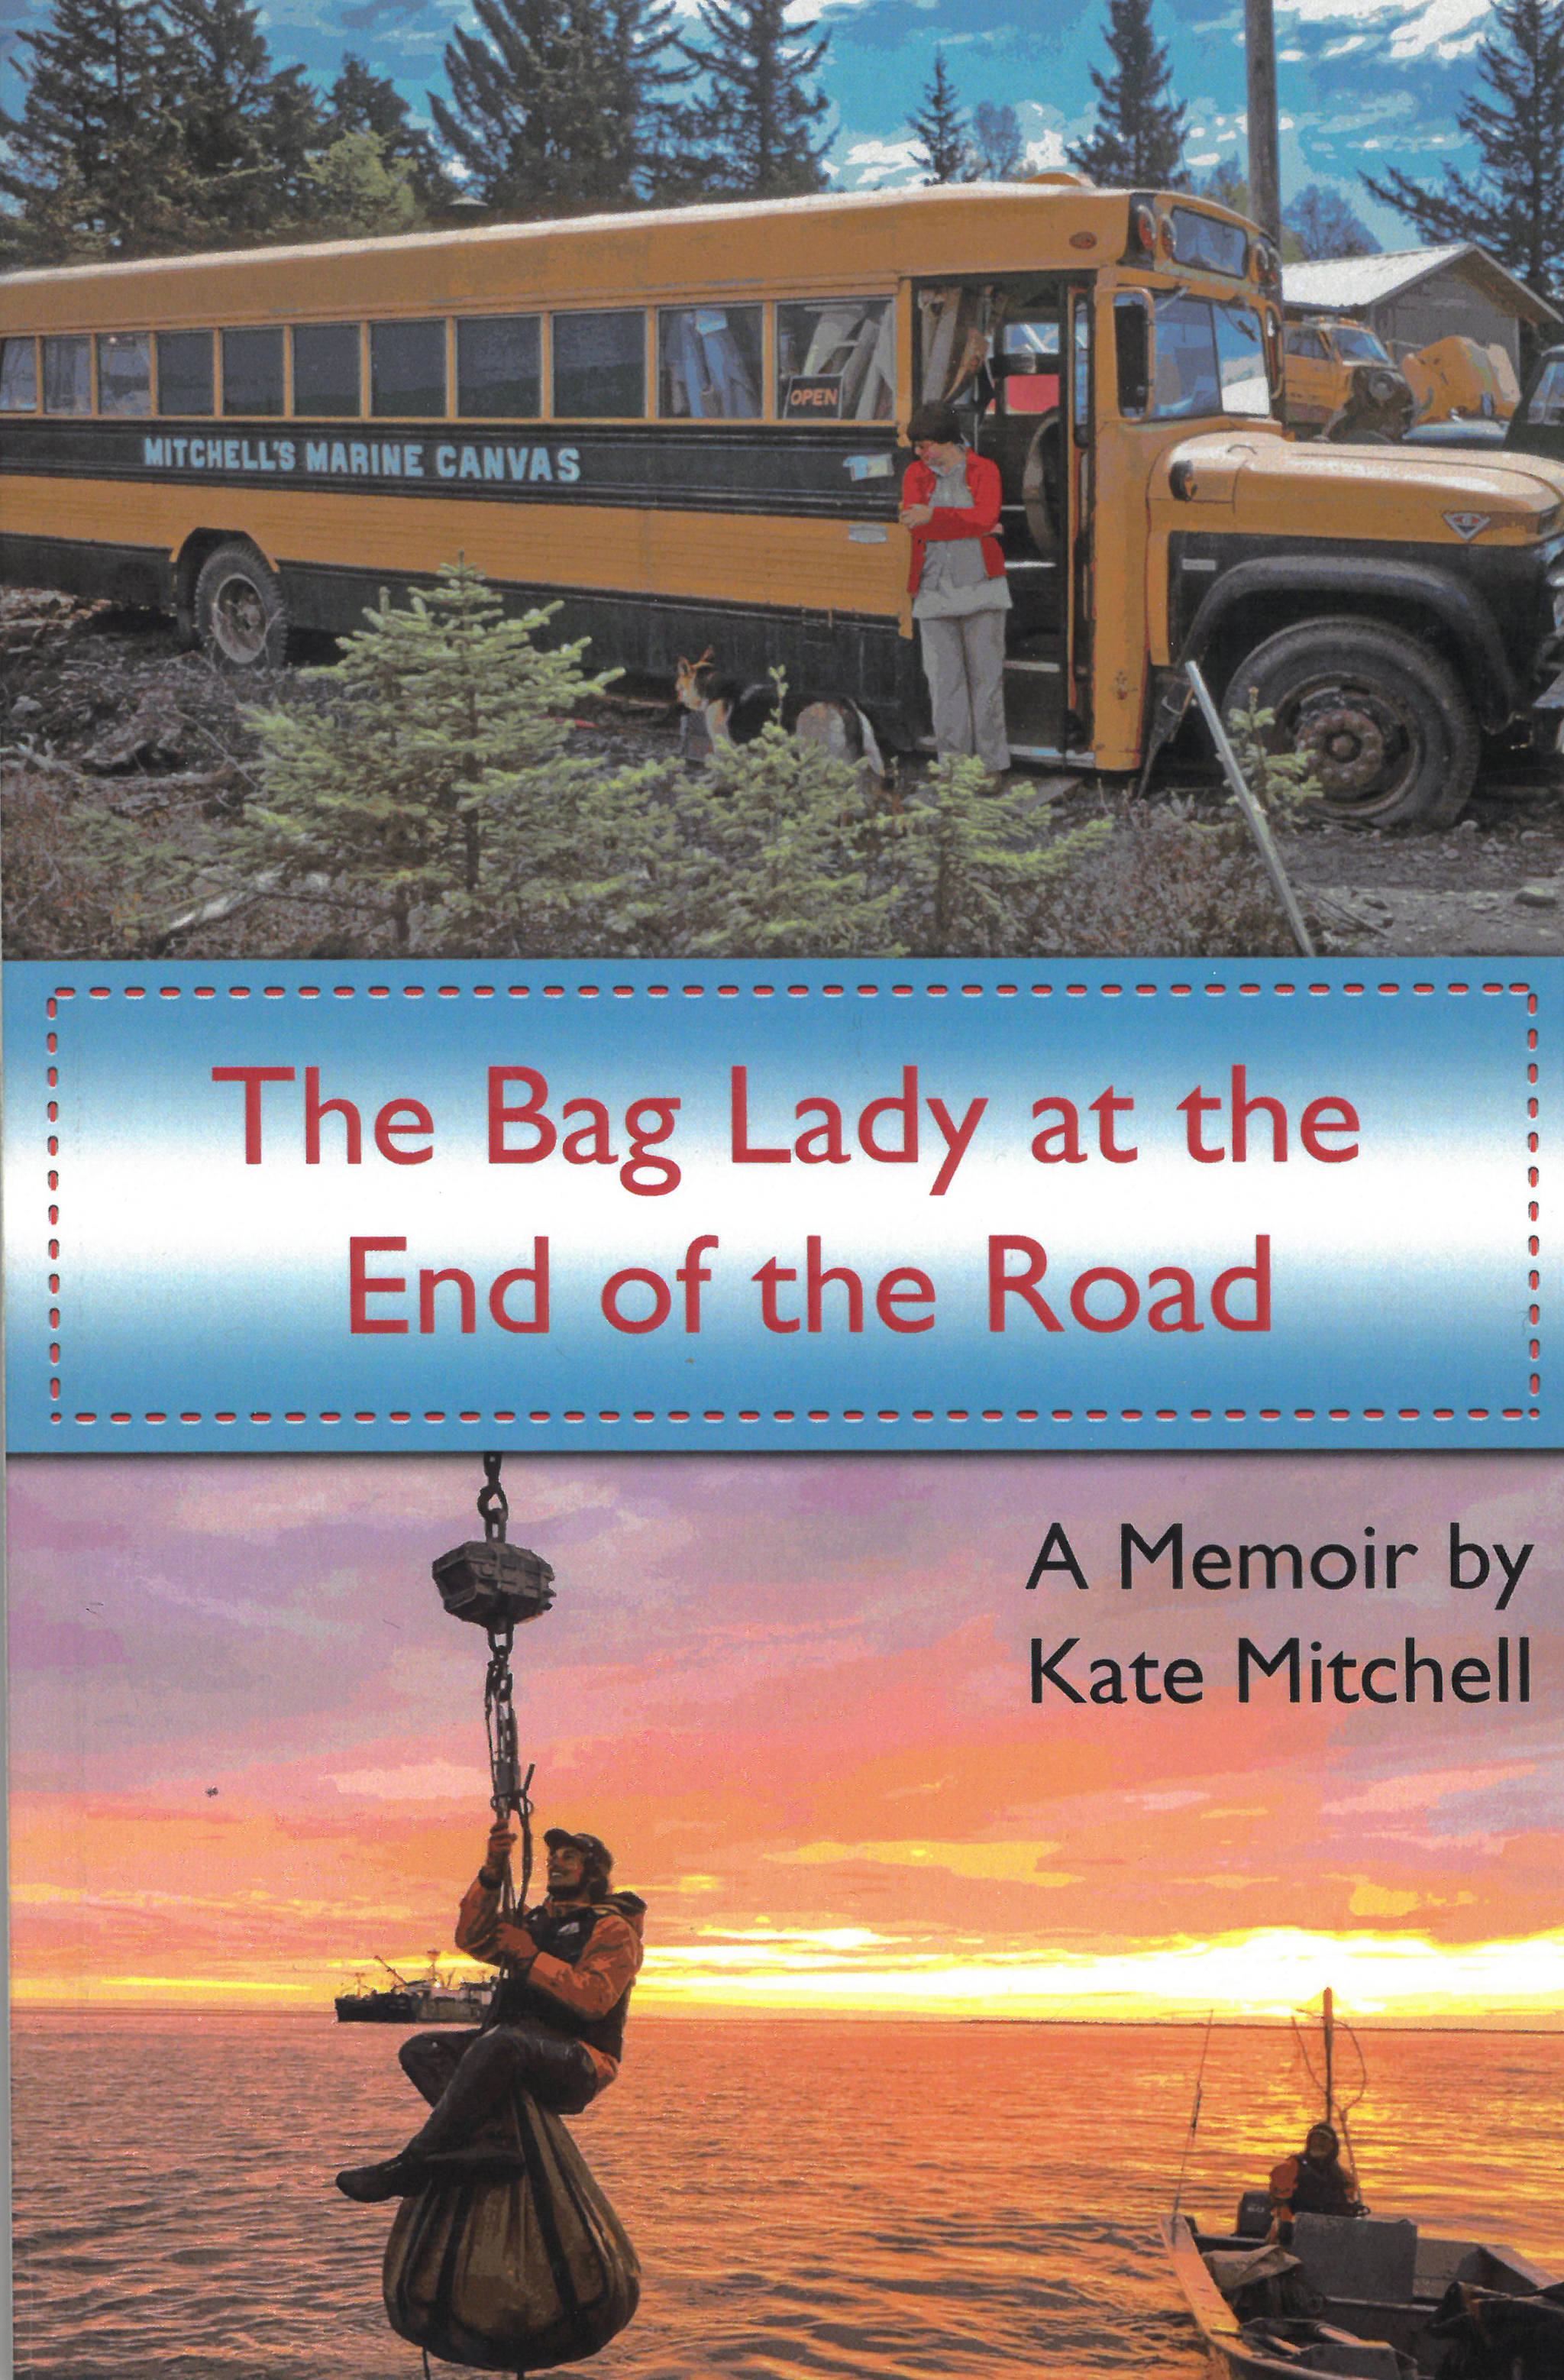 Image provided                                The cover of Kate Mitchell’s “The Bag Lady at the End of the Road,” published in 2018 by Wizard Works.